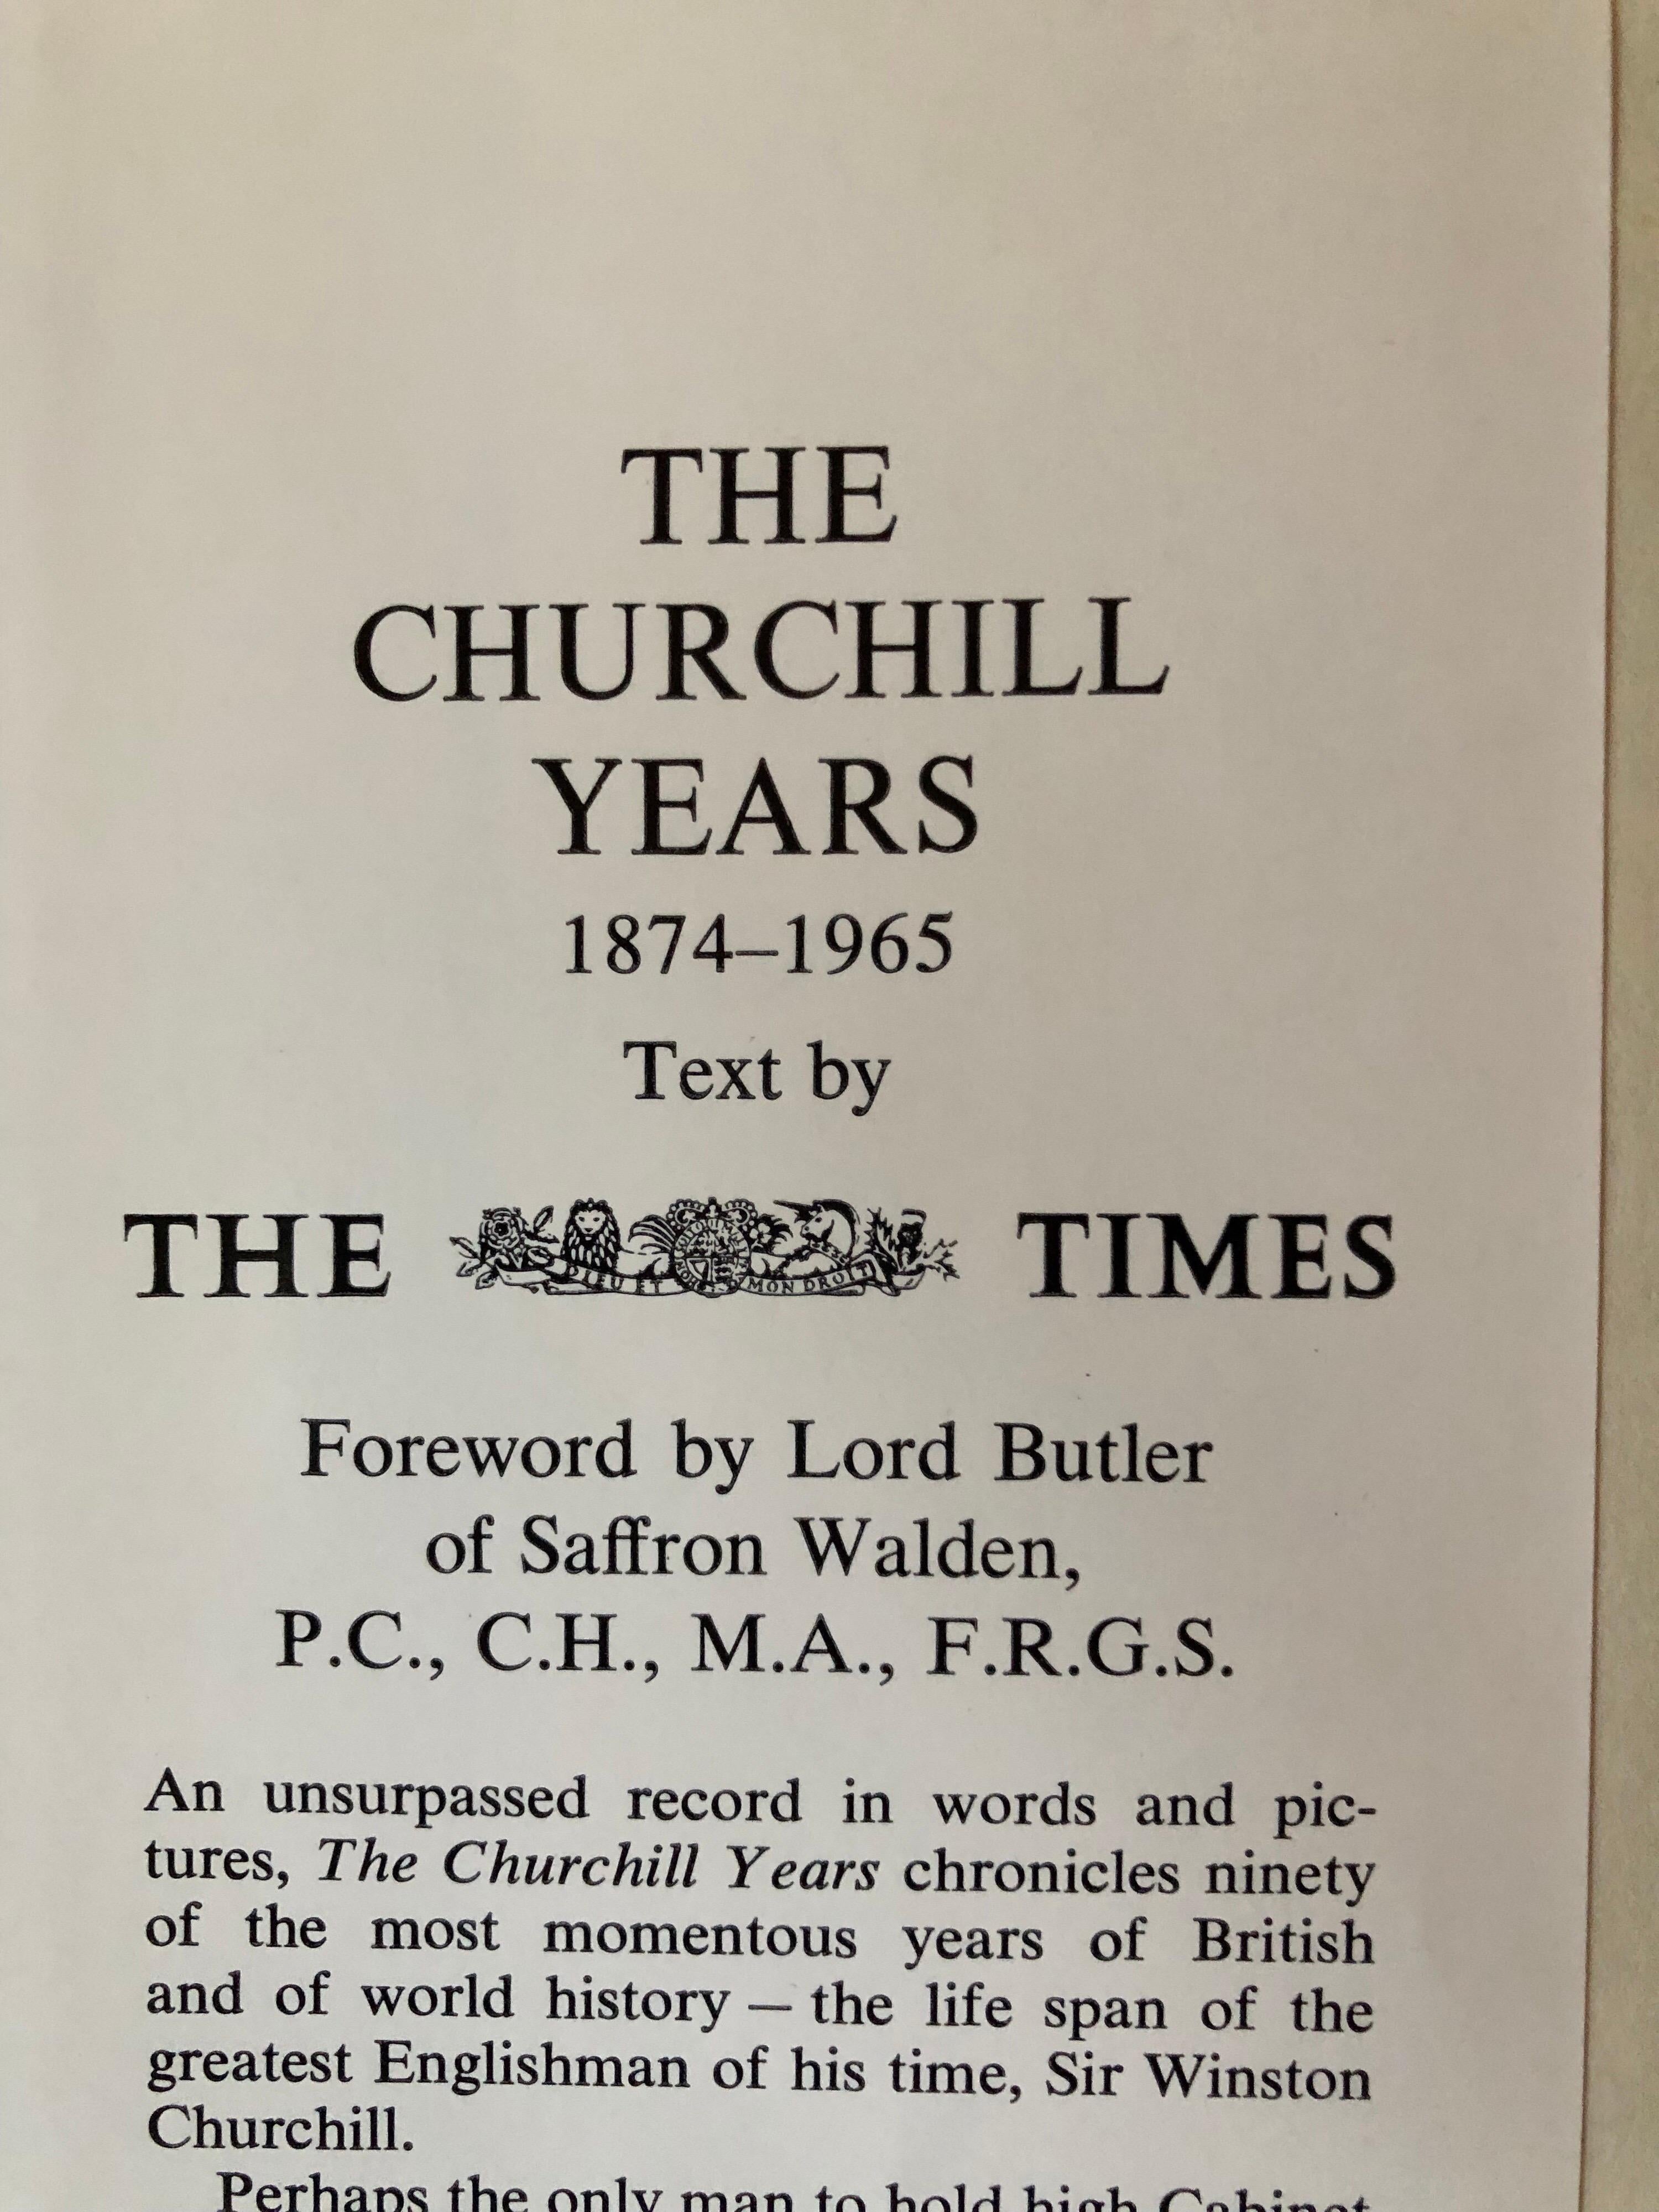 Foreword By Lord Butler Of Saffron Walden
The Churchill years, 1874-1965
Text by The Times of London
The Viking press, 1965. Hardcover.